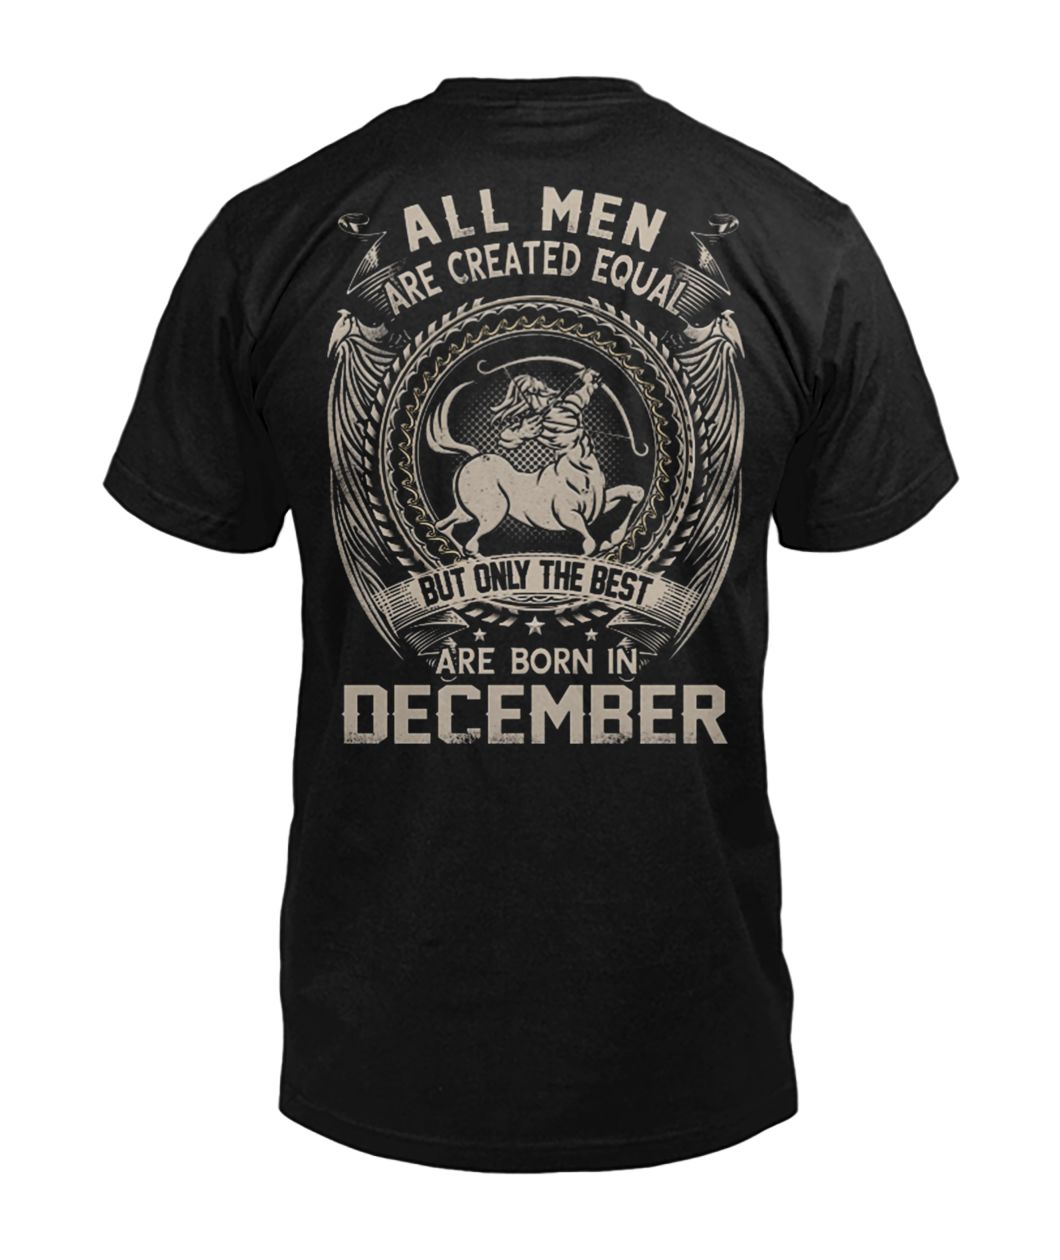 All men created equal but the best are born in december mens v-neck